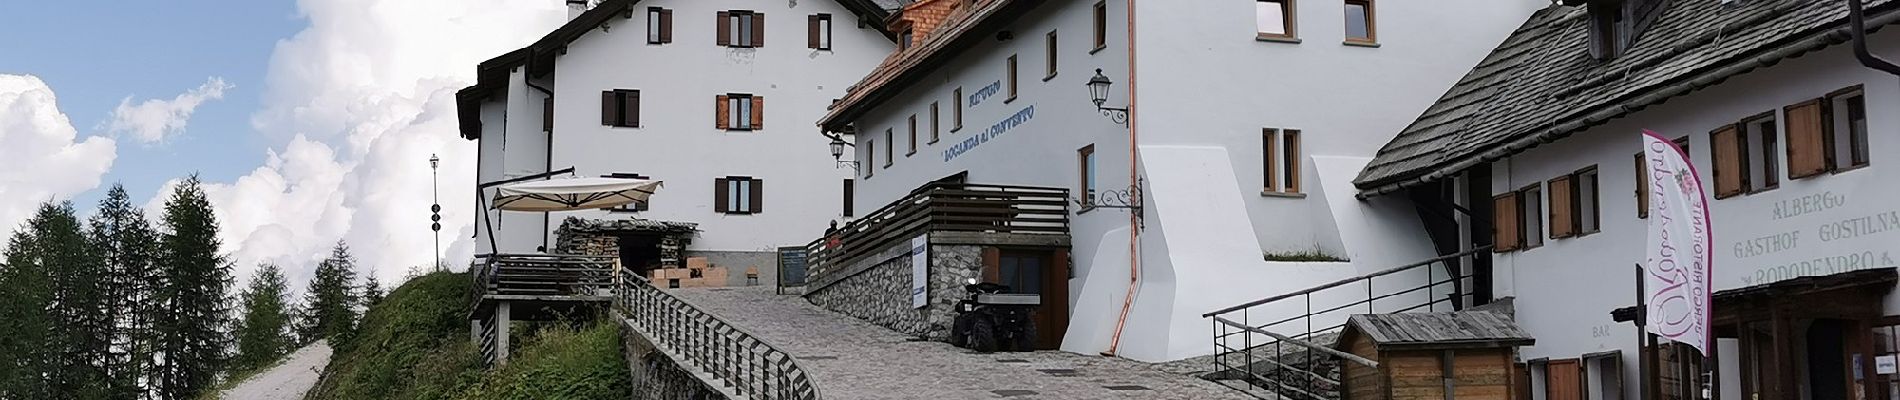 Trail On foot Tarvisio - IT-617 - Photo